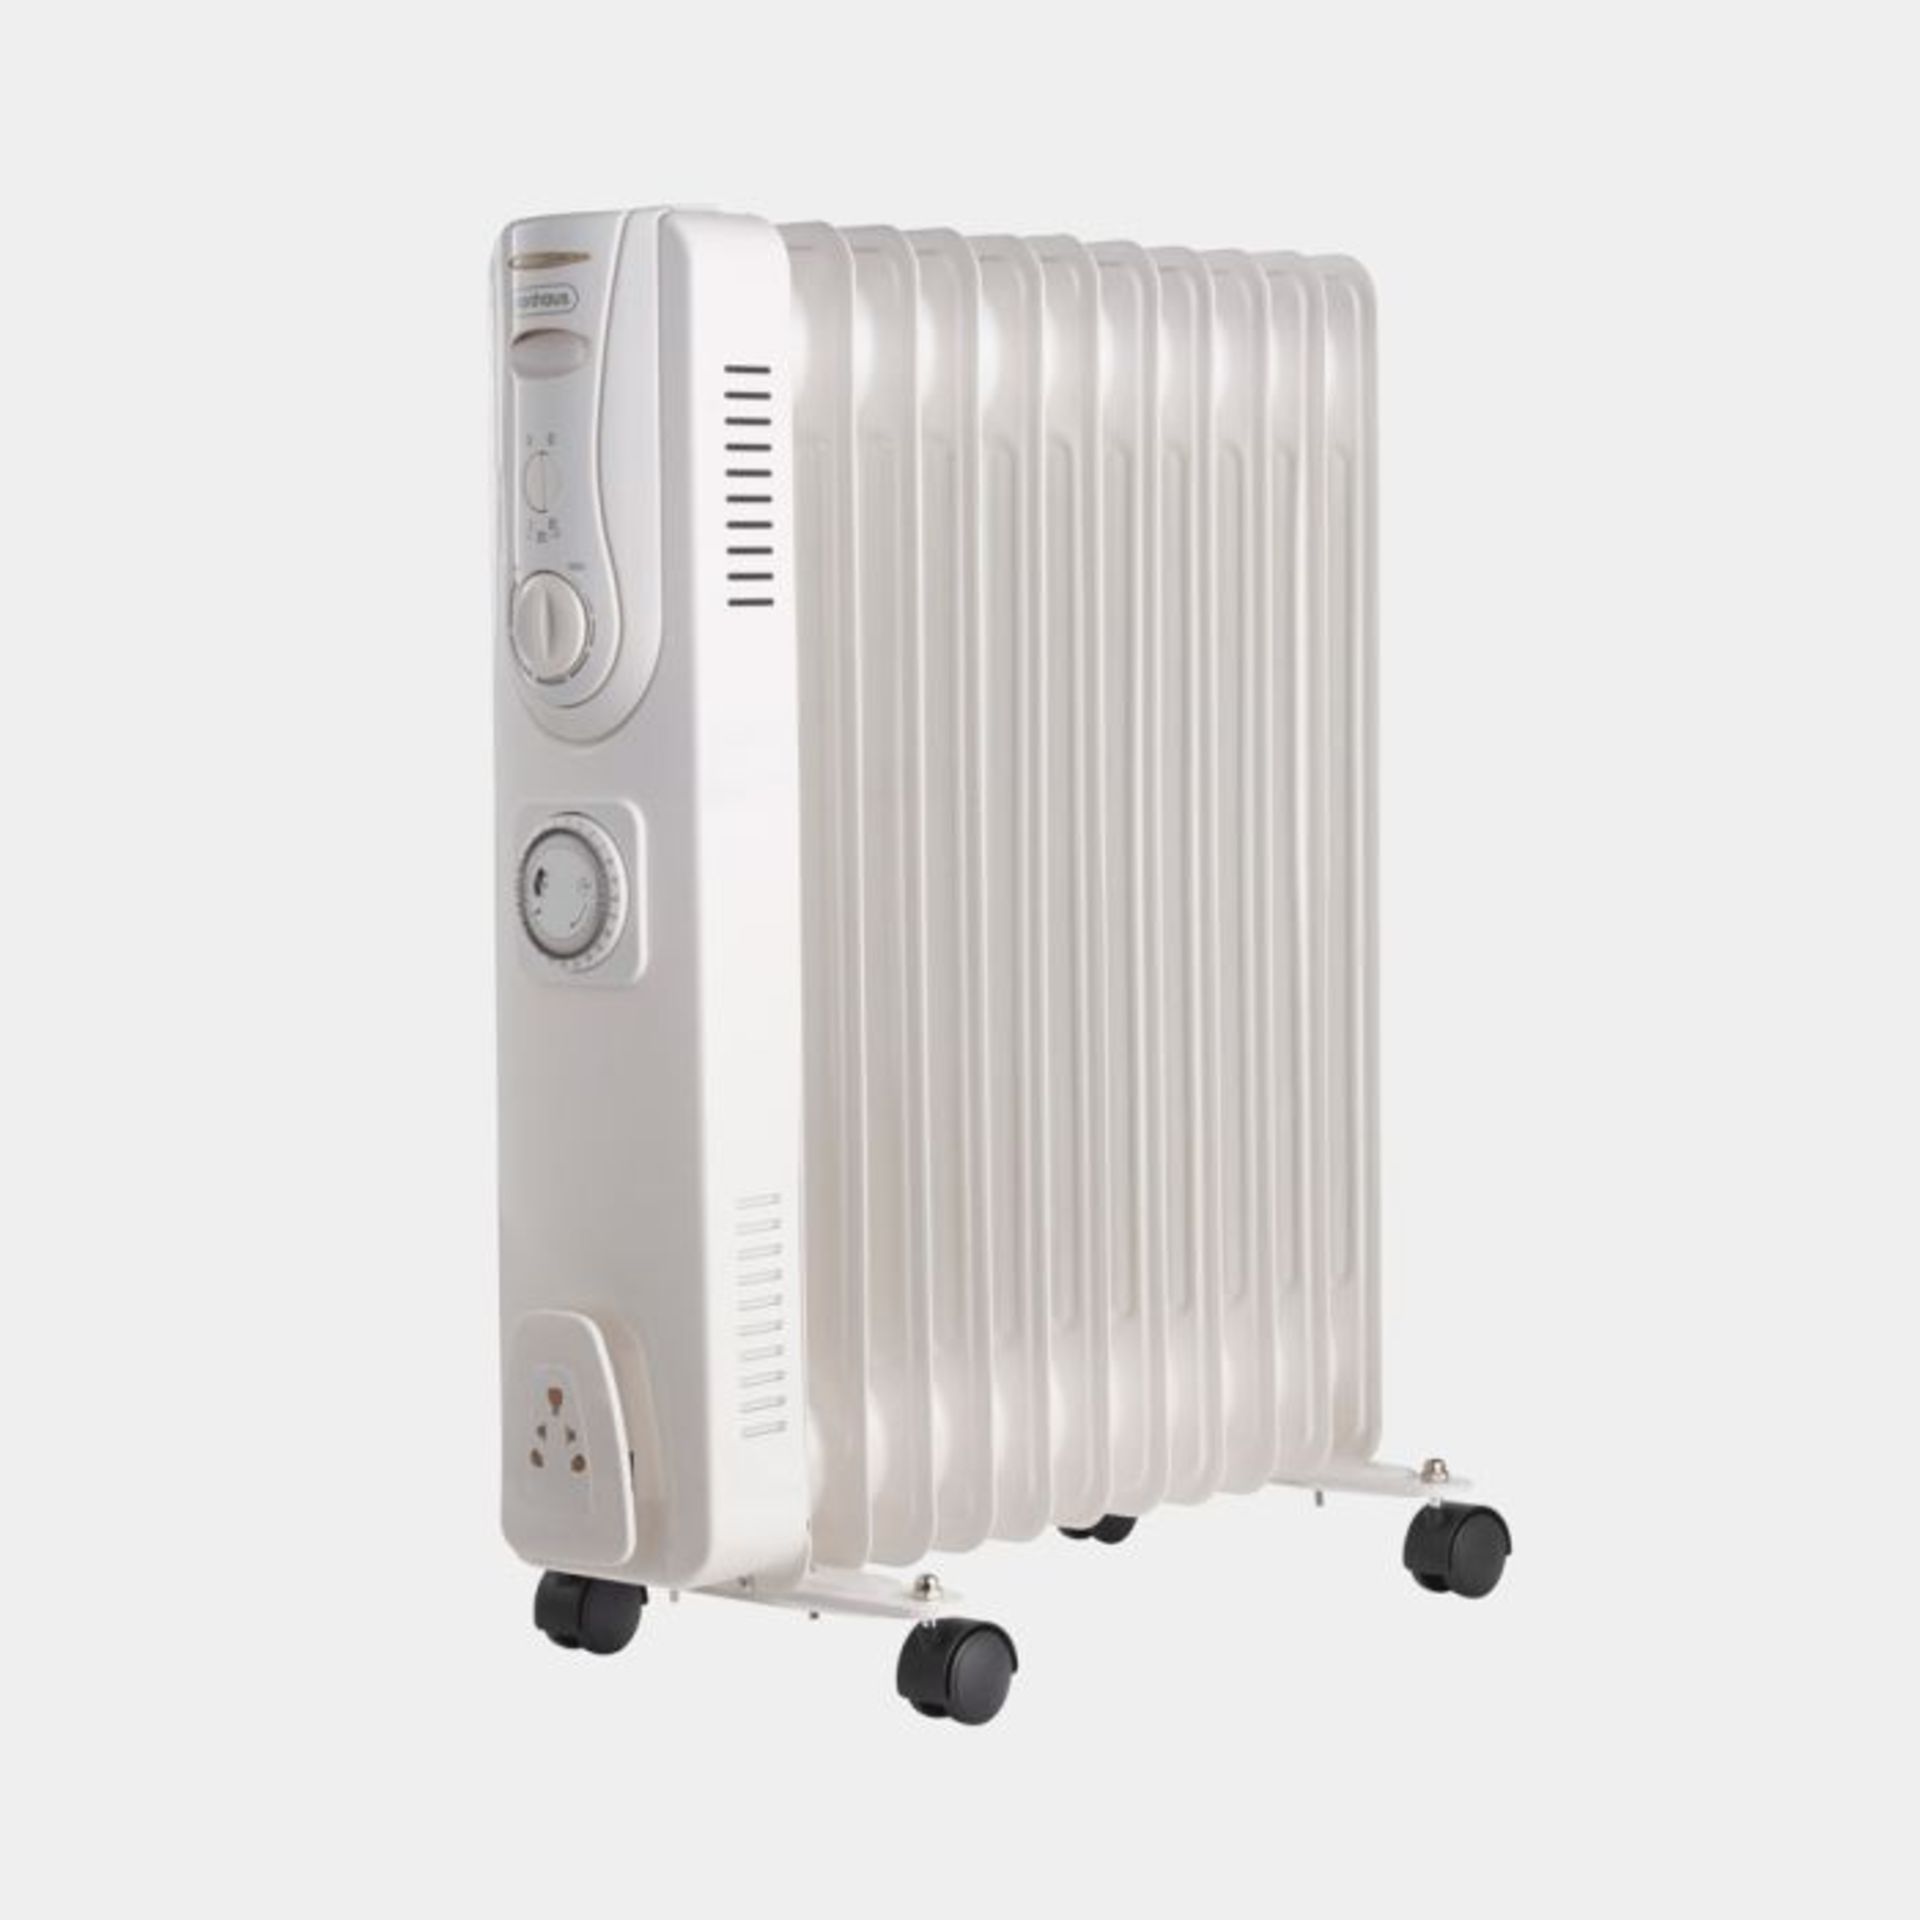 11 Fin 2500W Oil Filled Radiator - White. - PW. The radiator is equipped with fantastic safety